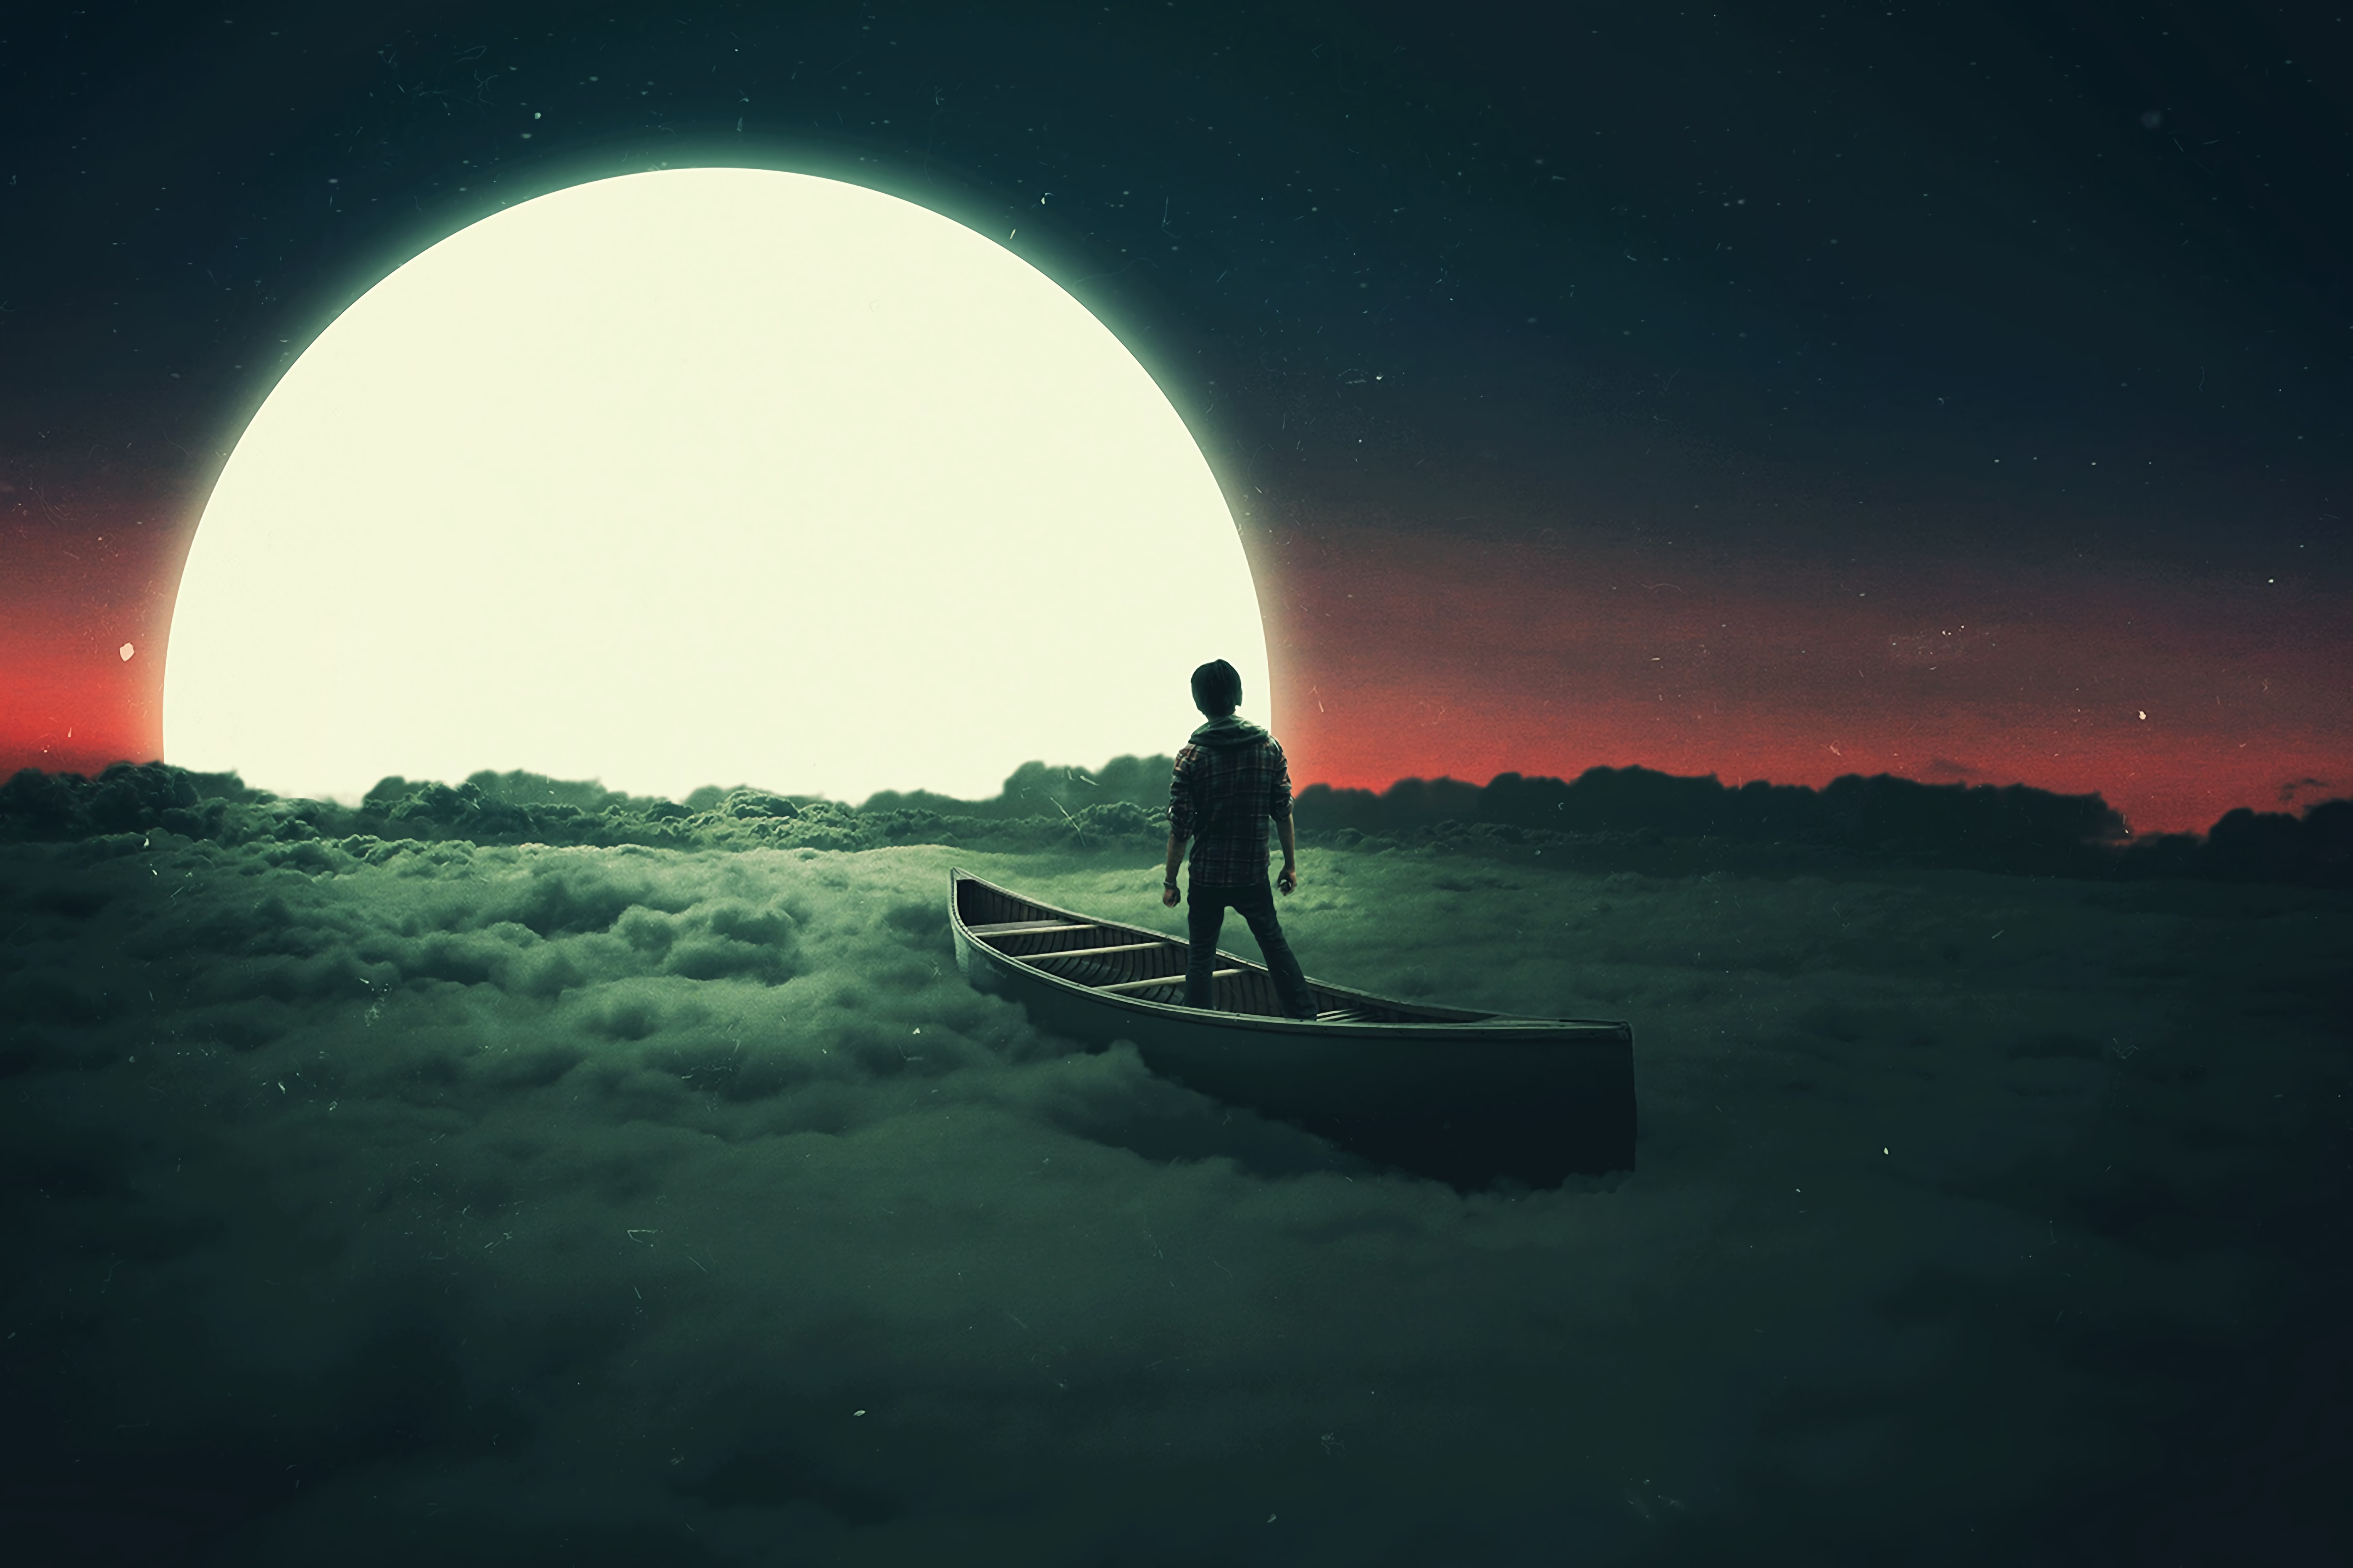 moon, miscellanea, silhouette, miscellaneous, loneliness, boat, lonely, surrealism Aesthetic wallpaper